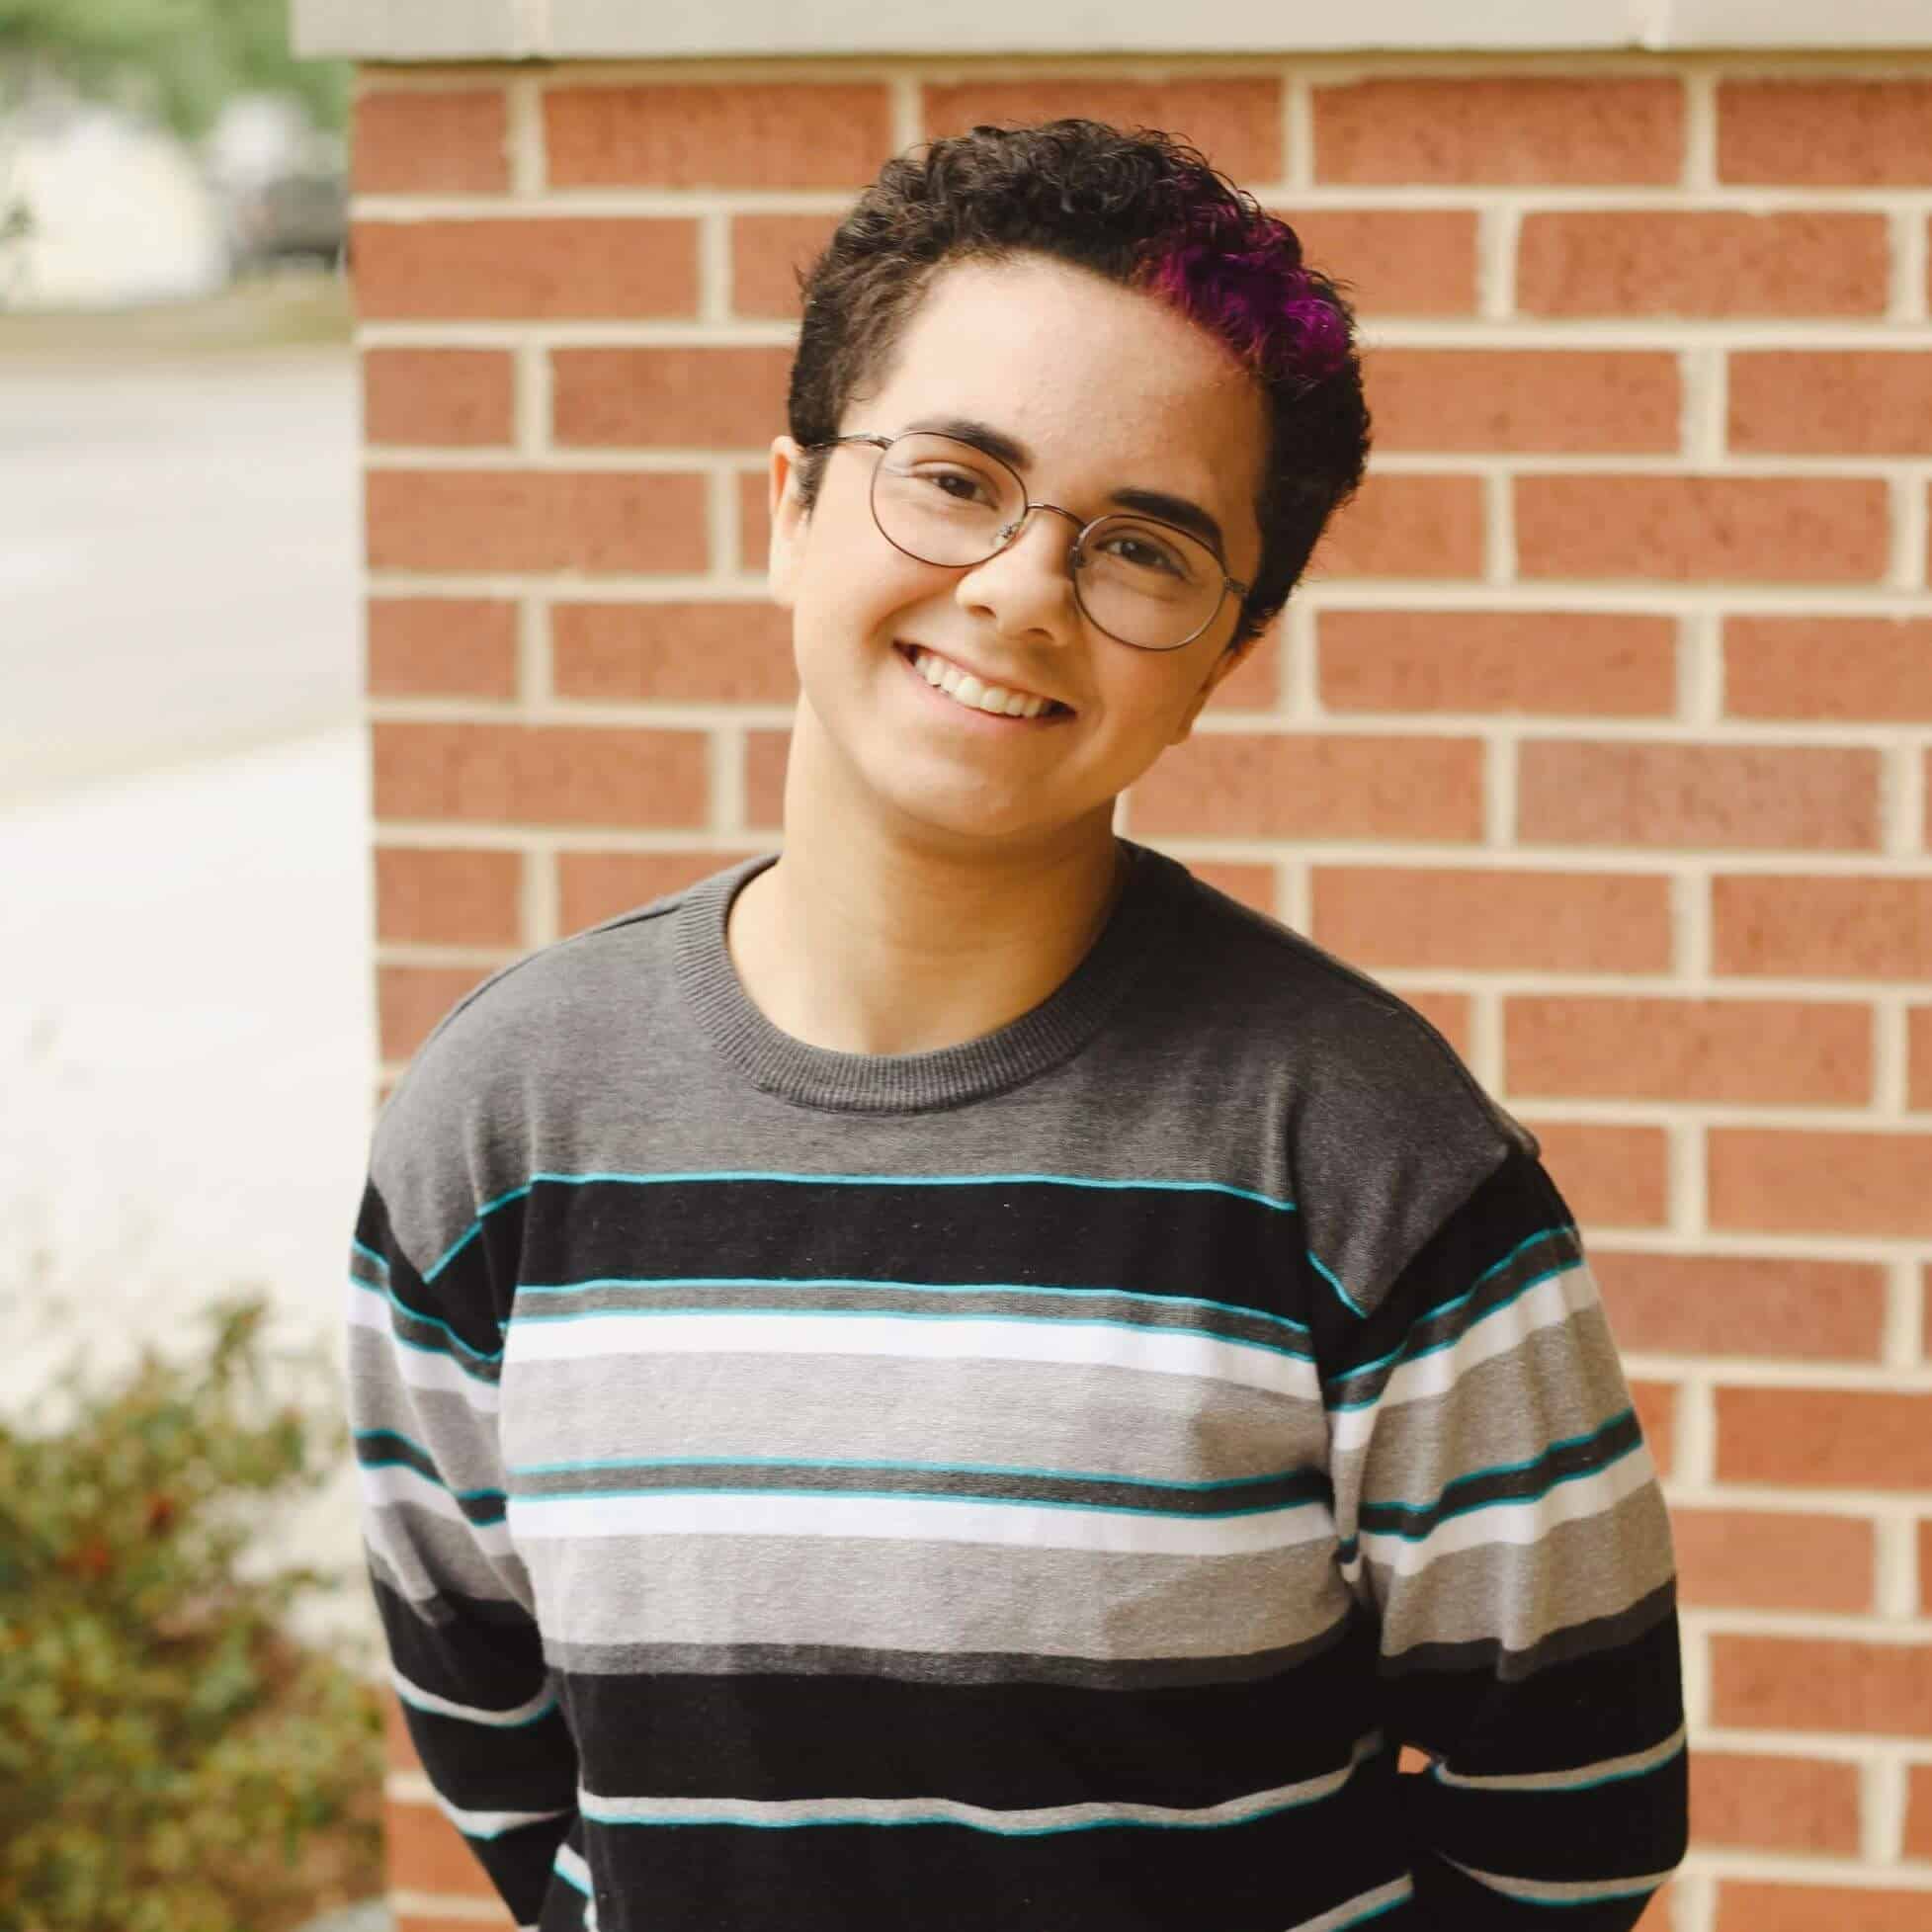 Person with glasses and a striped sweater smiling in front of a brick wall.